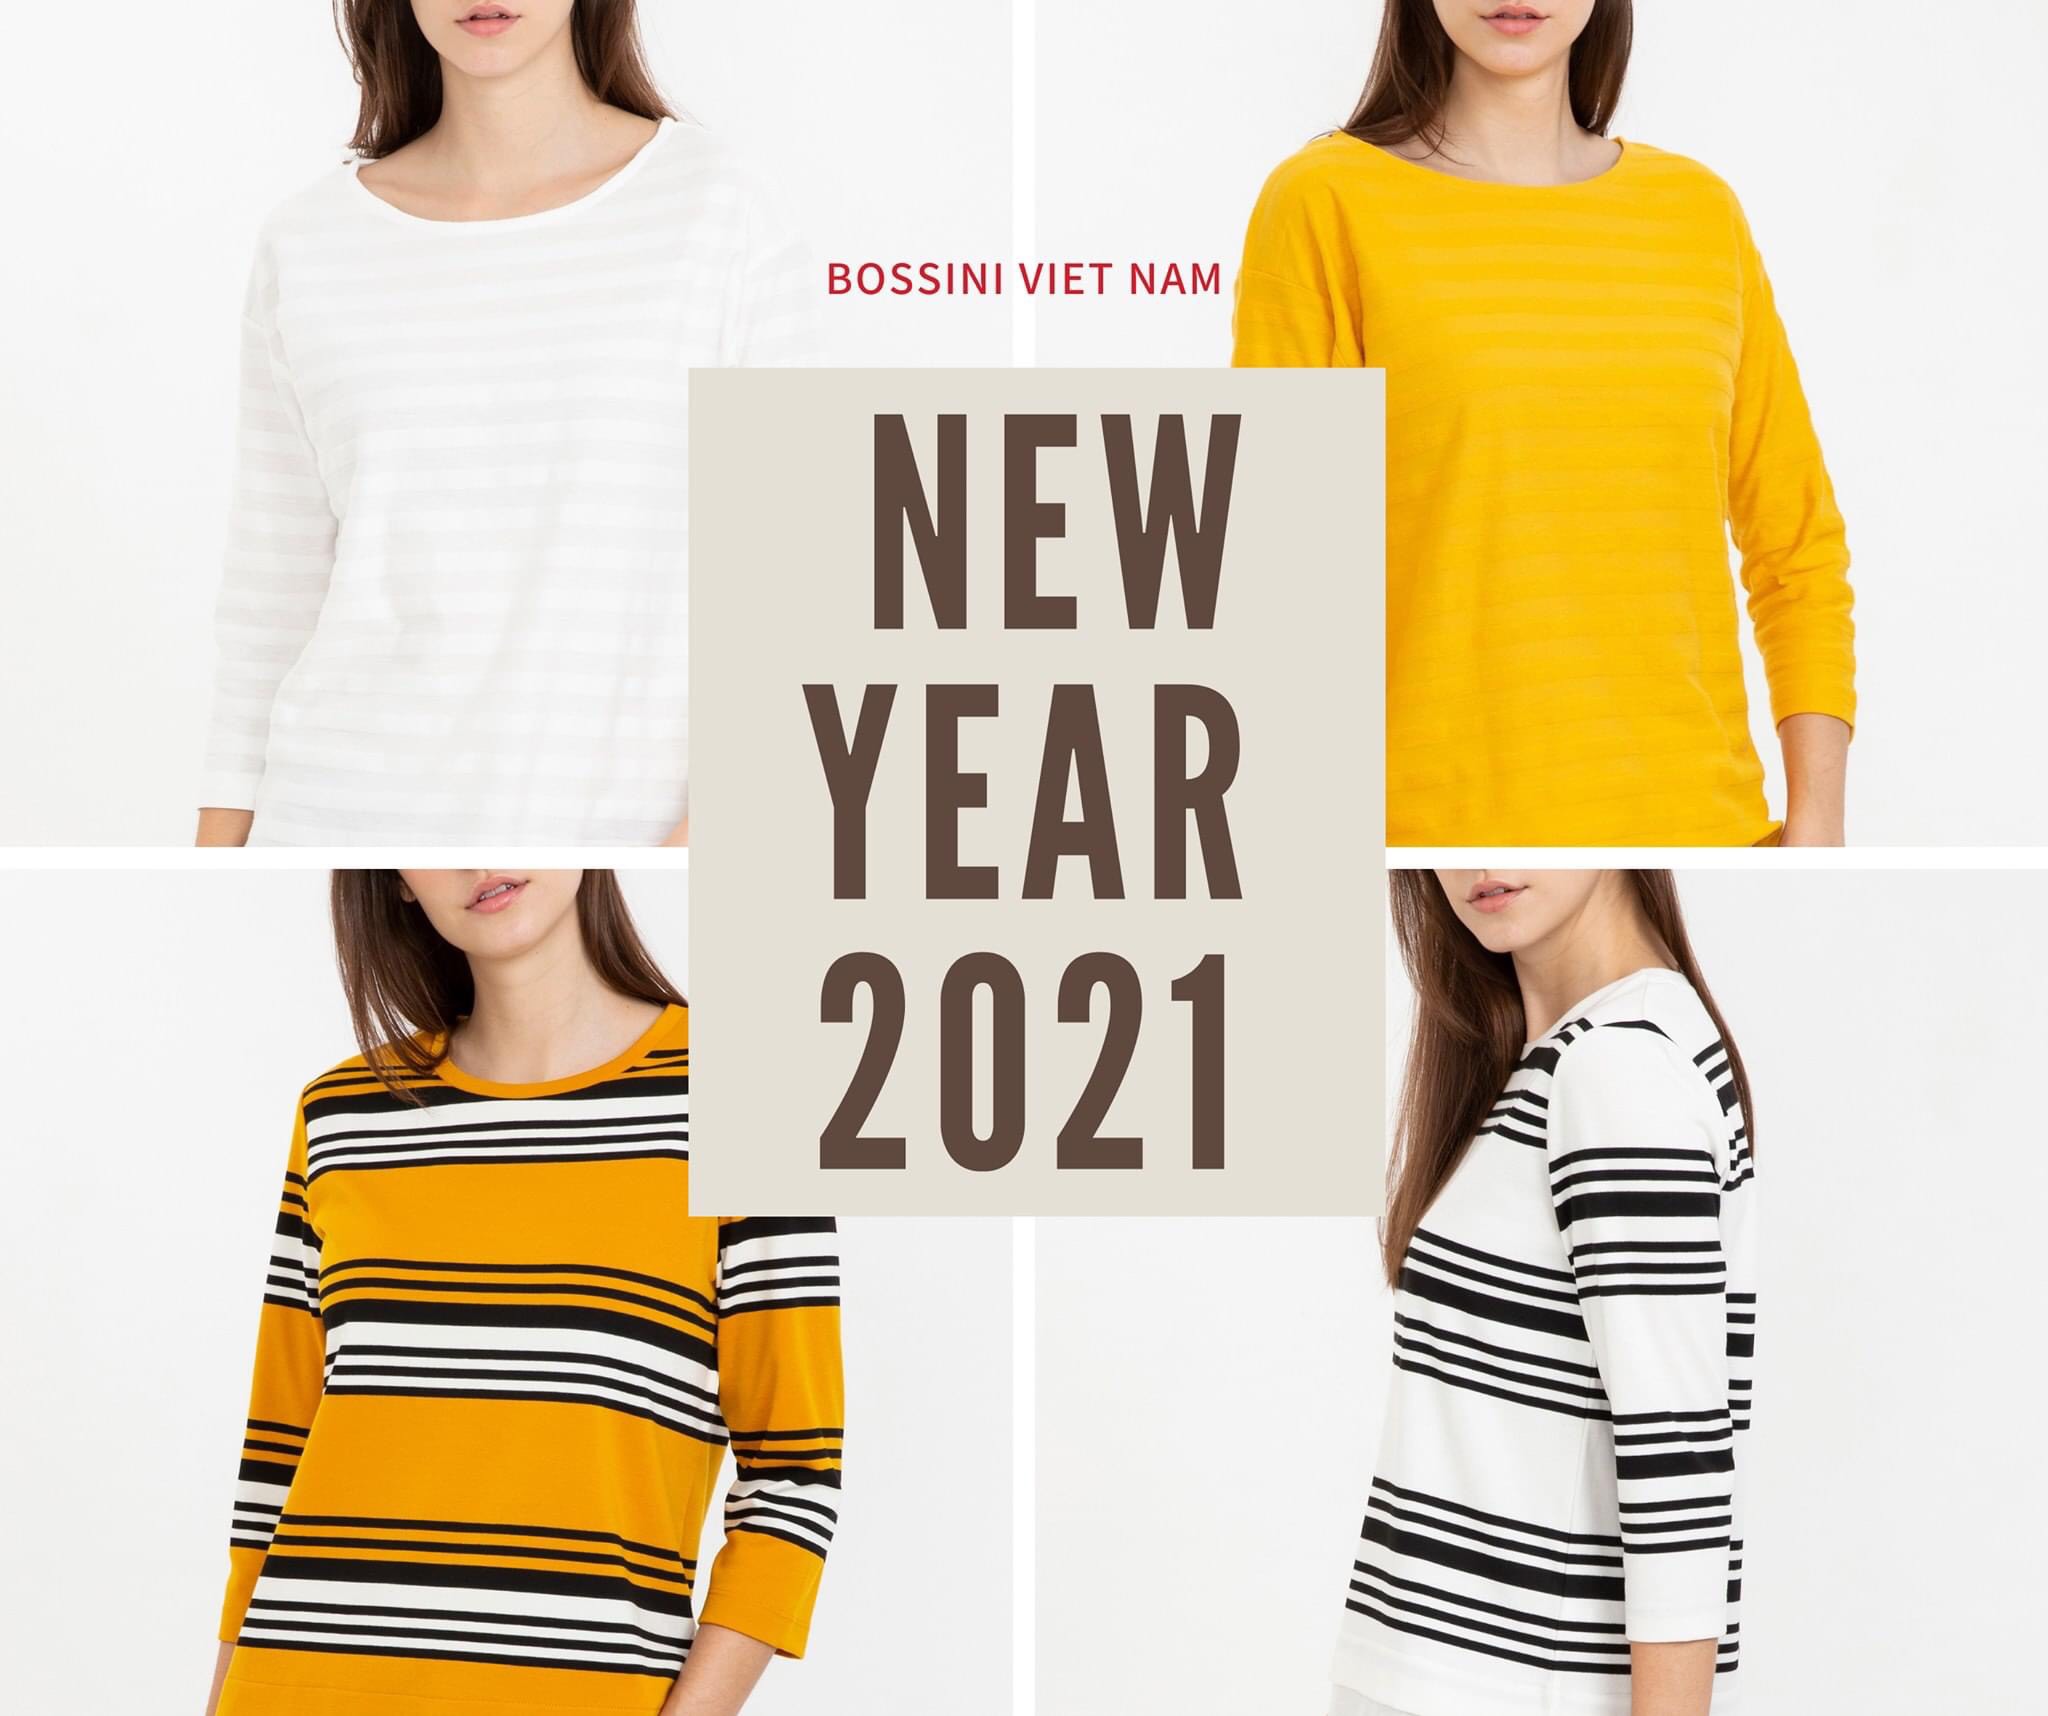 BOSSINI – NEW YEAR 2021 COLLECTION